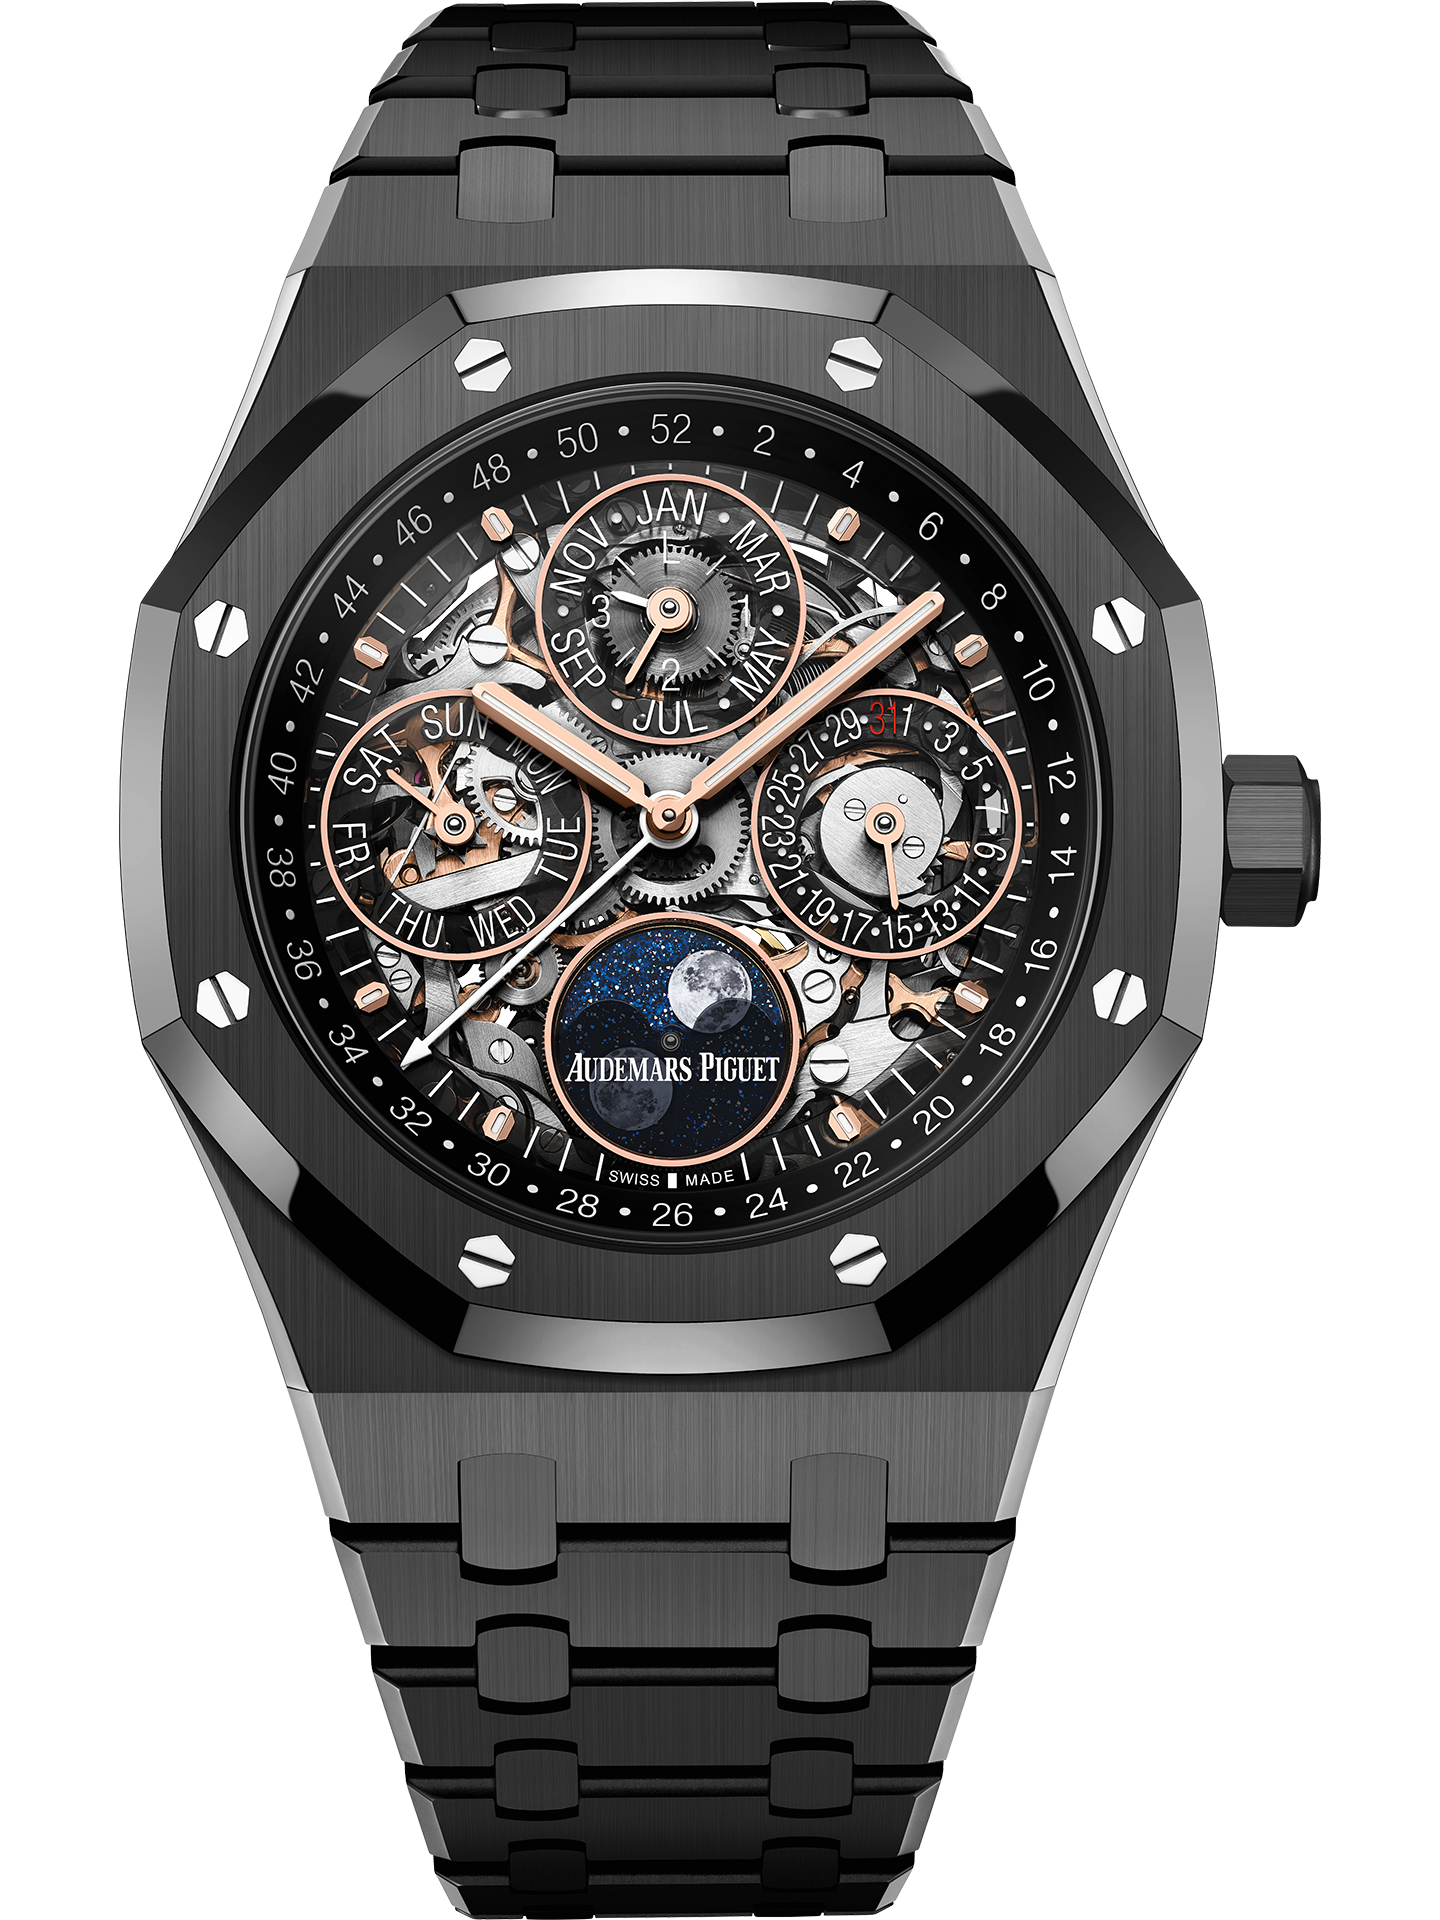 Product Spotlight: Why We Love the Audemars Piguet Royal Oak Watch Series -  Luxury Of Watches